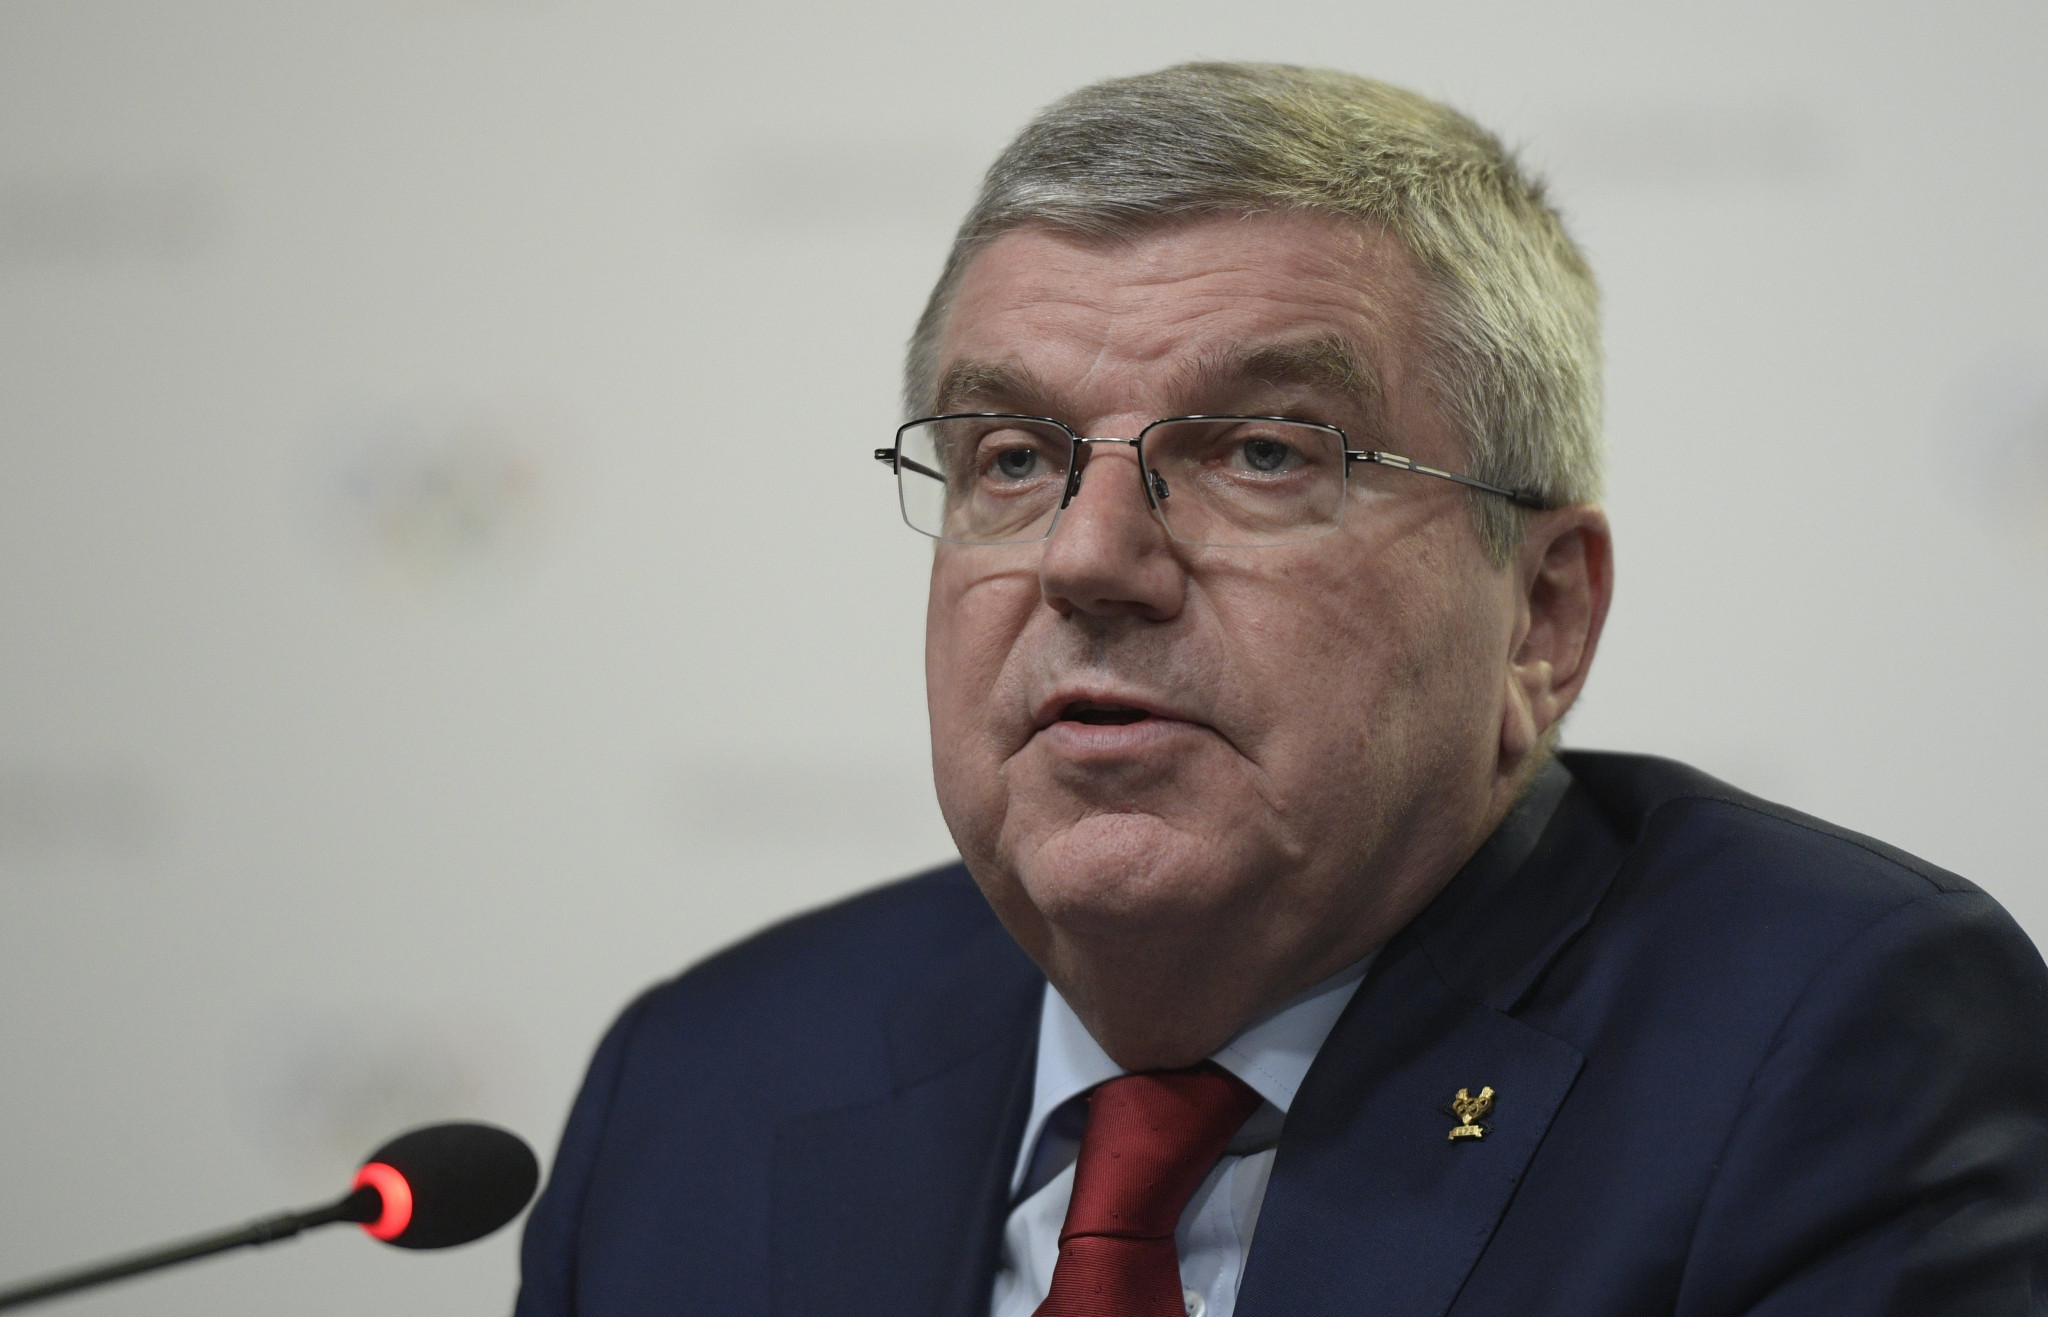 IOC President Thomas Bach has previously claimed there is 